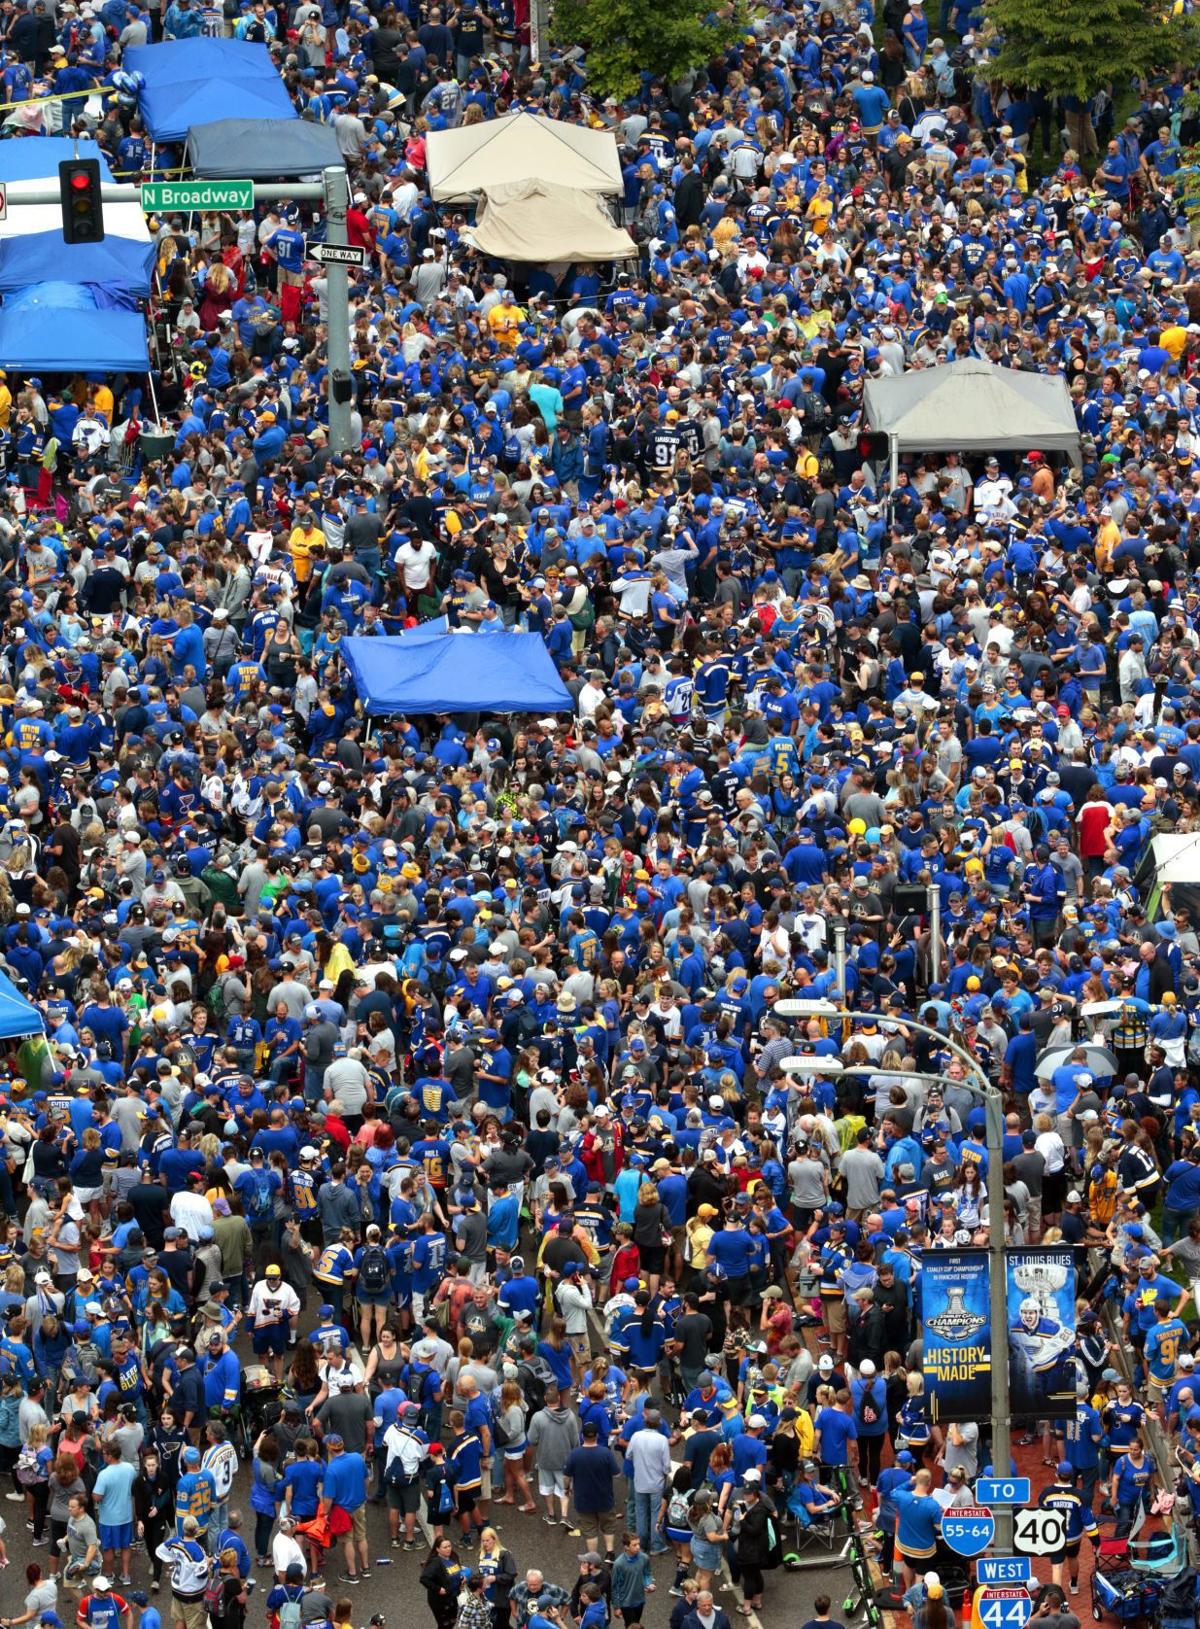 Blues wave overtakes downtown as fans celebrate their team | Metro | 0